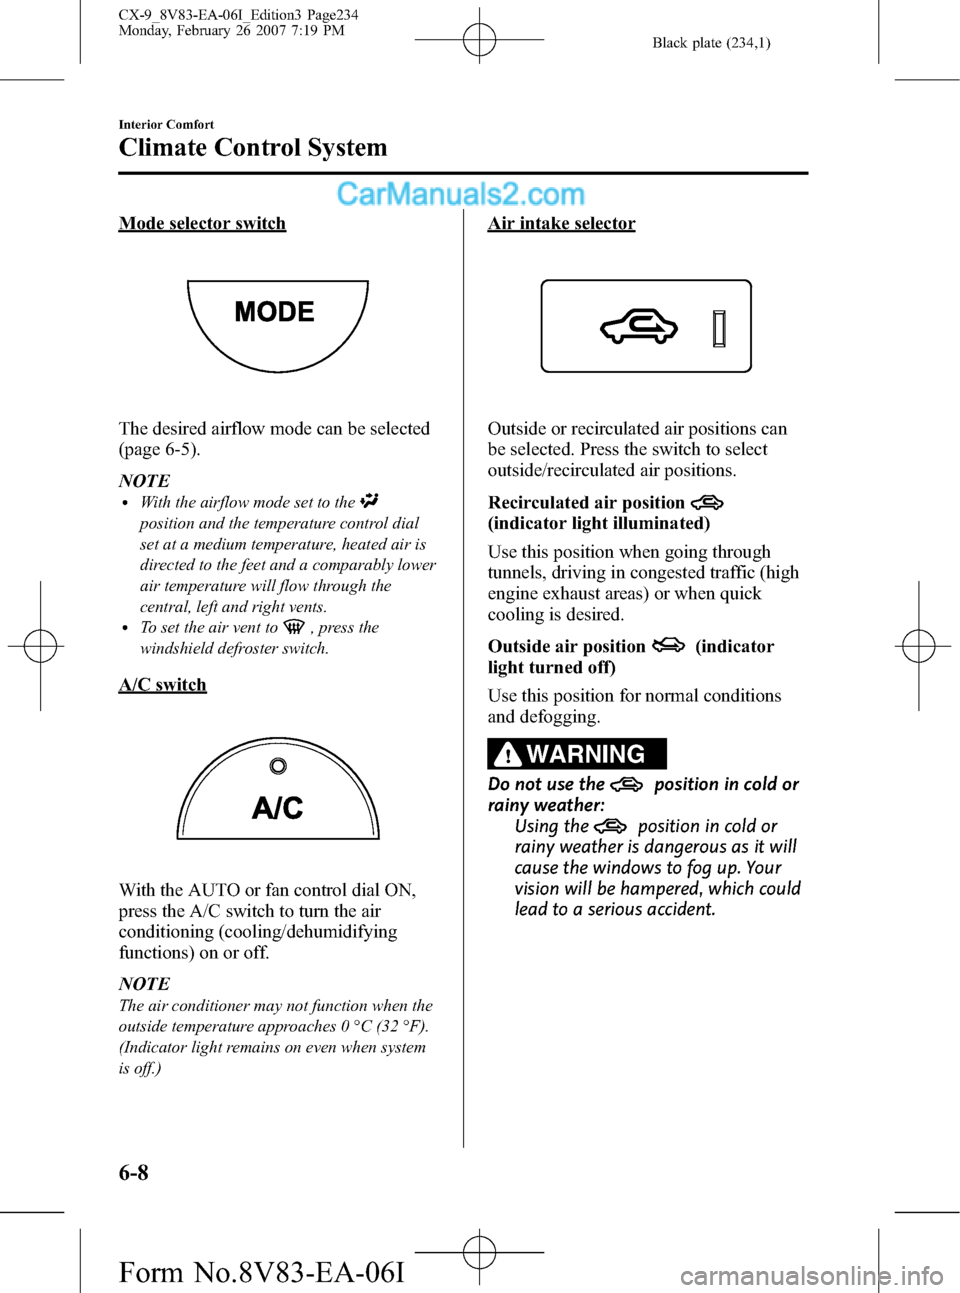 MAZDA MODEL CX-9 2007  Owners Manual (in English) Black plate (234,1)
Mode selector switch
The desired airflow mode can be selected
(page 6-5).
NOTE
lWith the airflow mode set to the
position and the temperature control dial
set at a medium temperatu